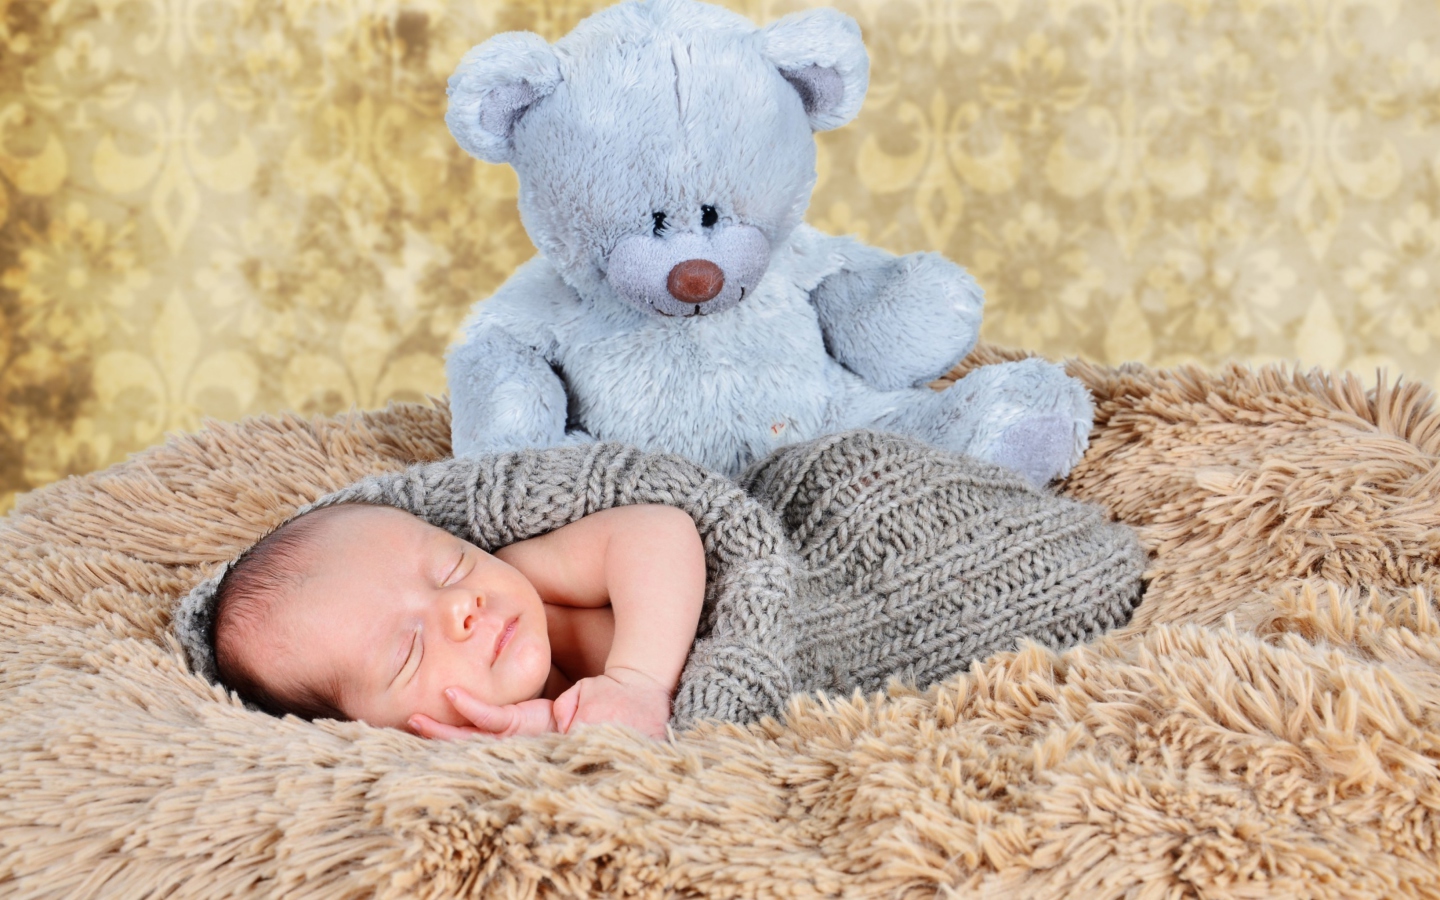 Baby And His Teddy wallpaper 1440x900